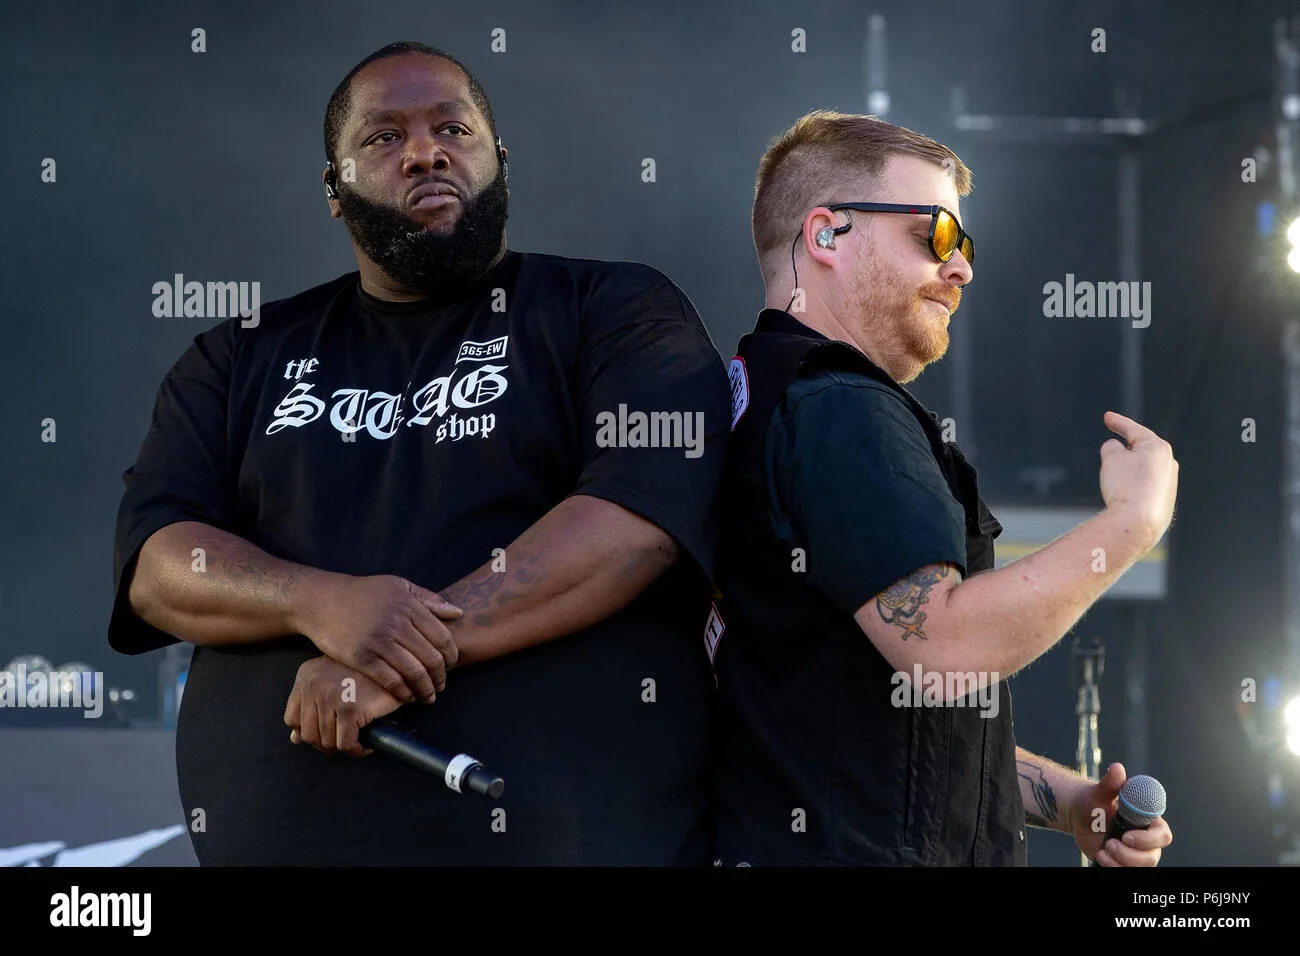 Rapper Killer Mike's 2024 Grammy Awards journey. On one side, the artist triumphantly stands on stage with three Grammy awards, symbolizing his musical achievements.